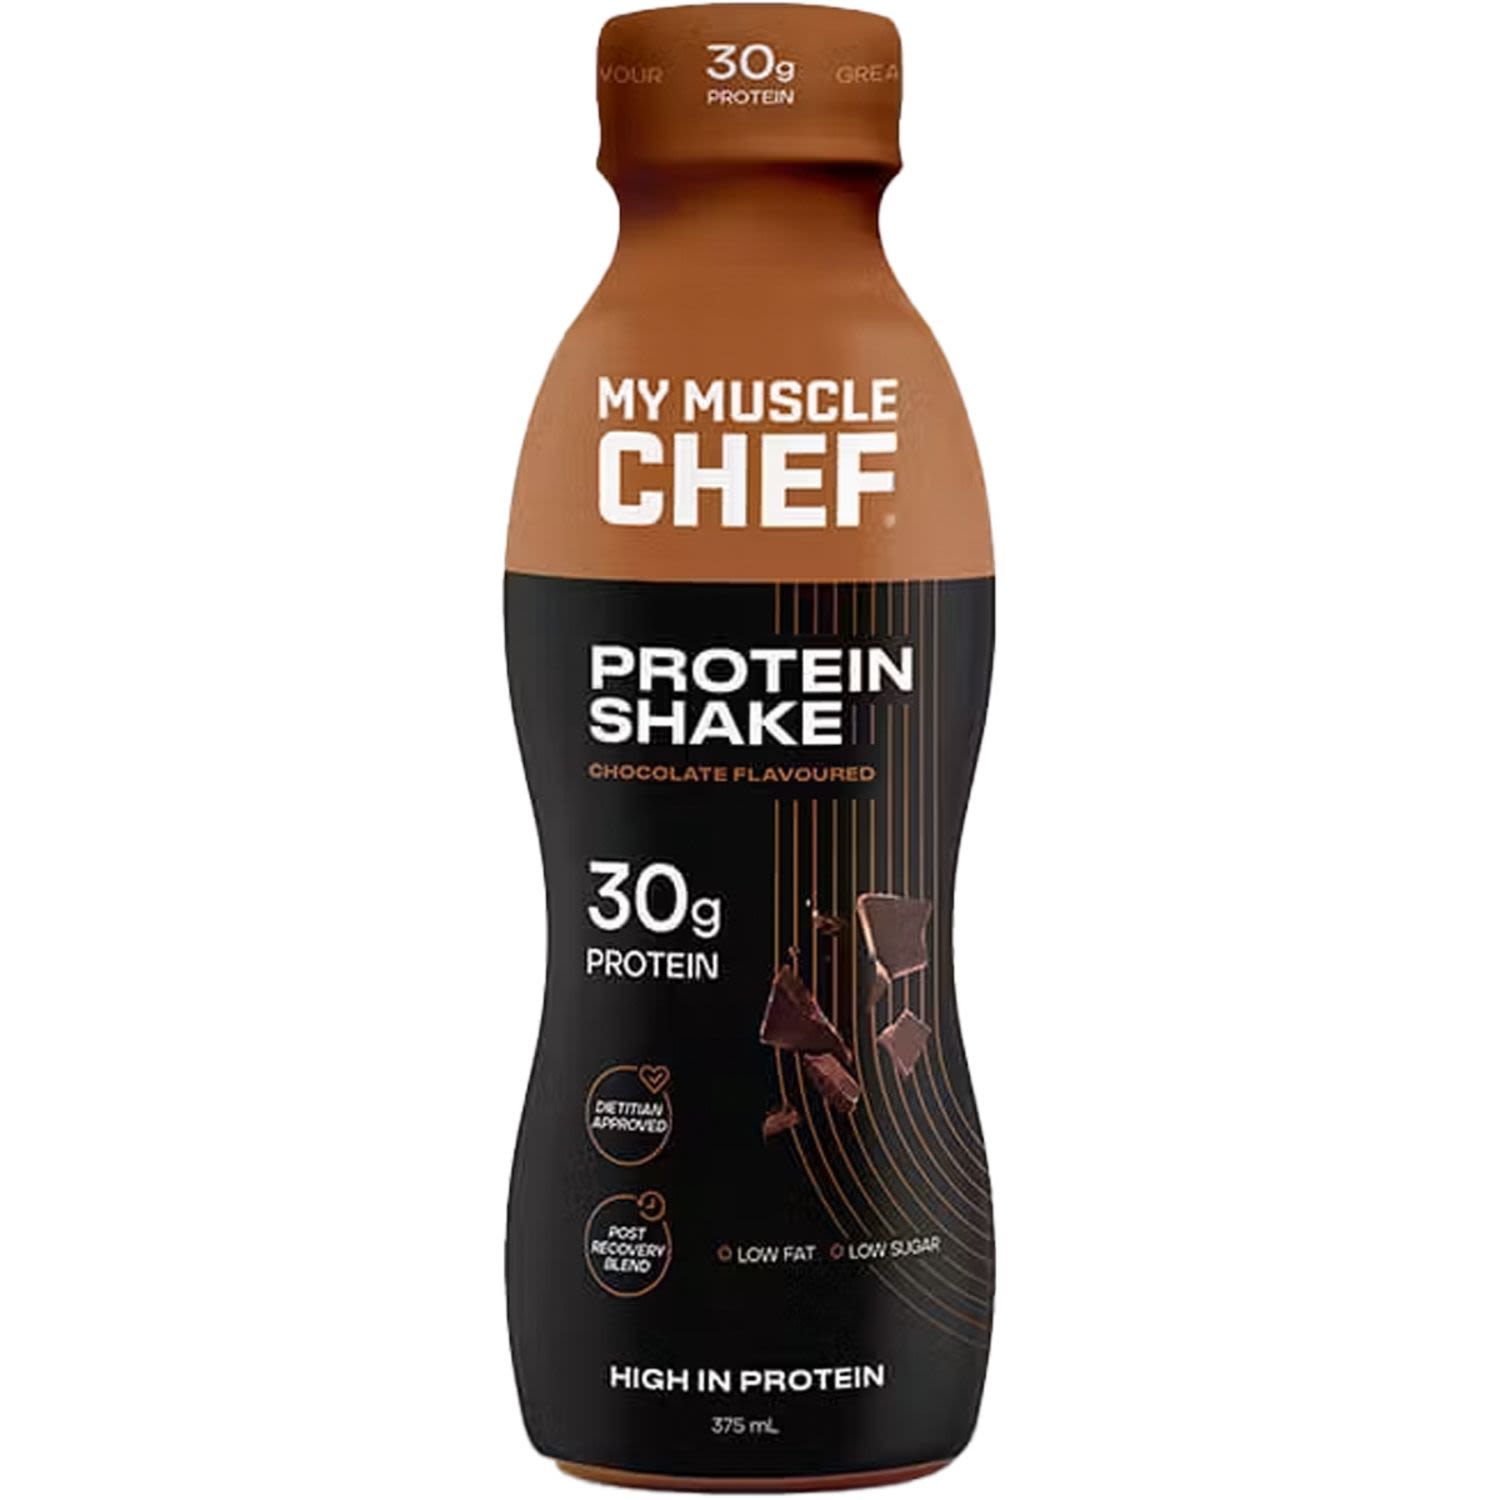 My Muscle Chef Chocolate Flavoured Protein Shake, 375 Gram